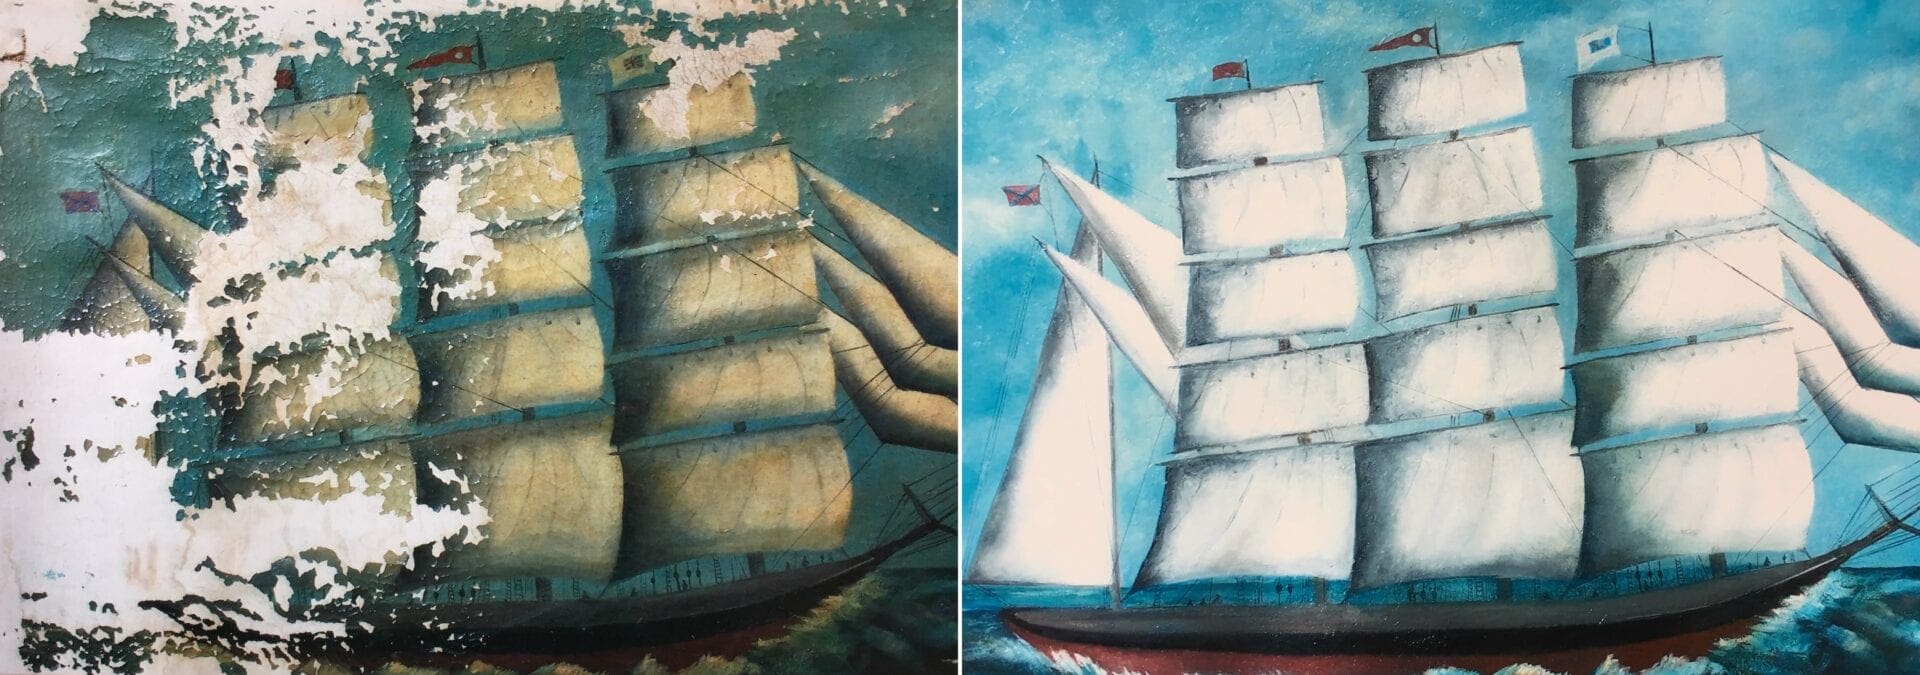 A painting of two ships in the ocean.